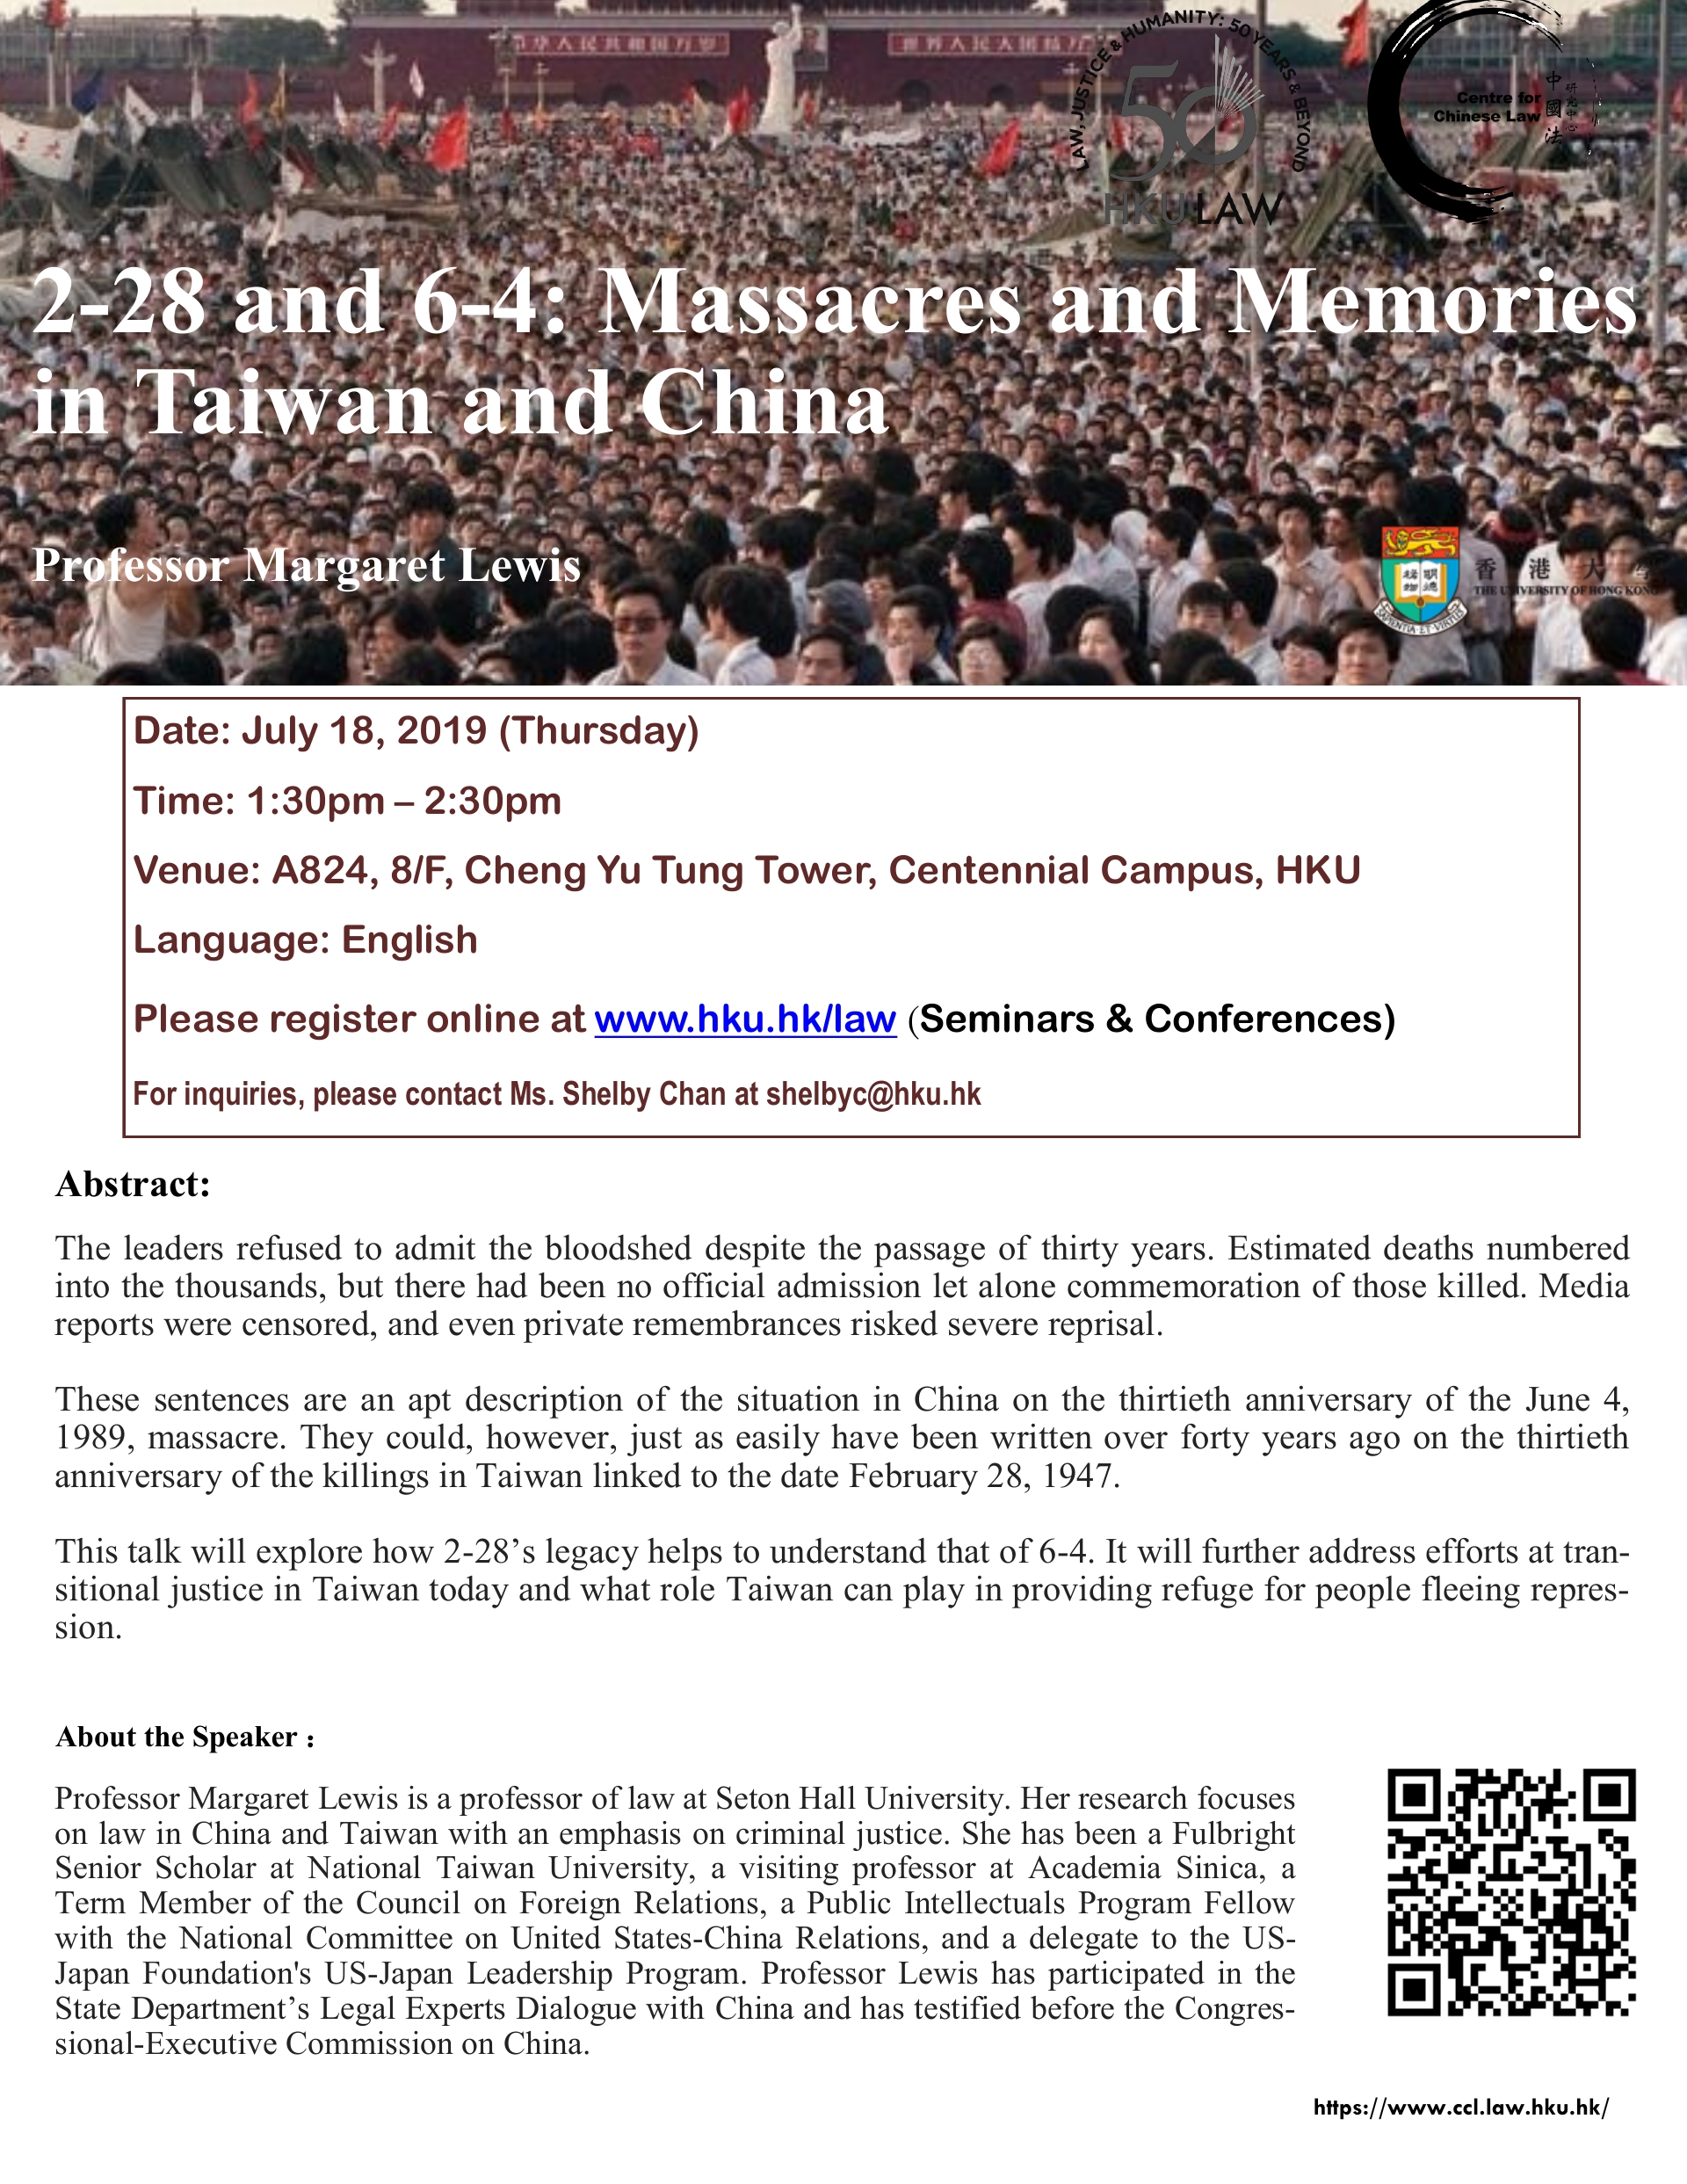 2-28 and 6-4: Massacres and Memories in Taiwan and China